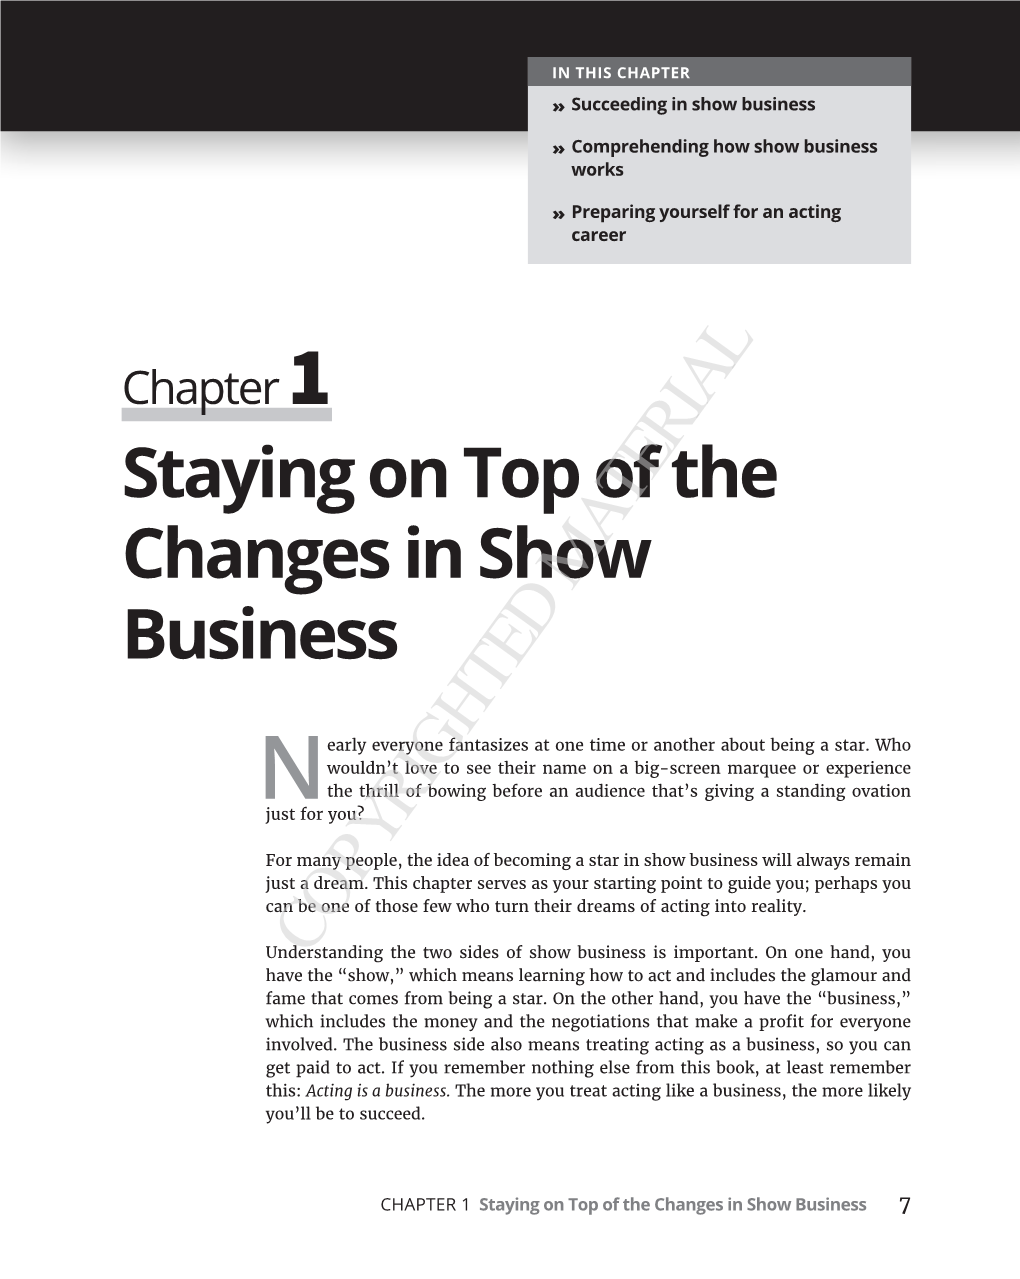 Staying on Top of the Changes in Show Business